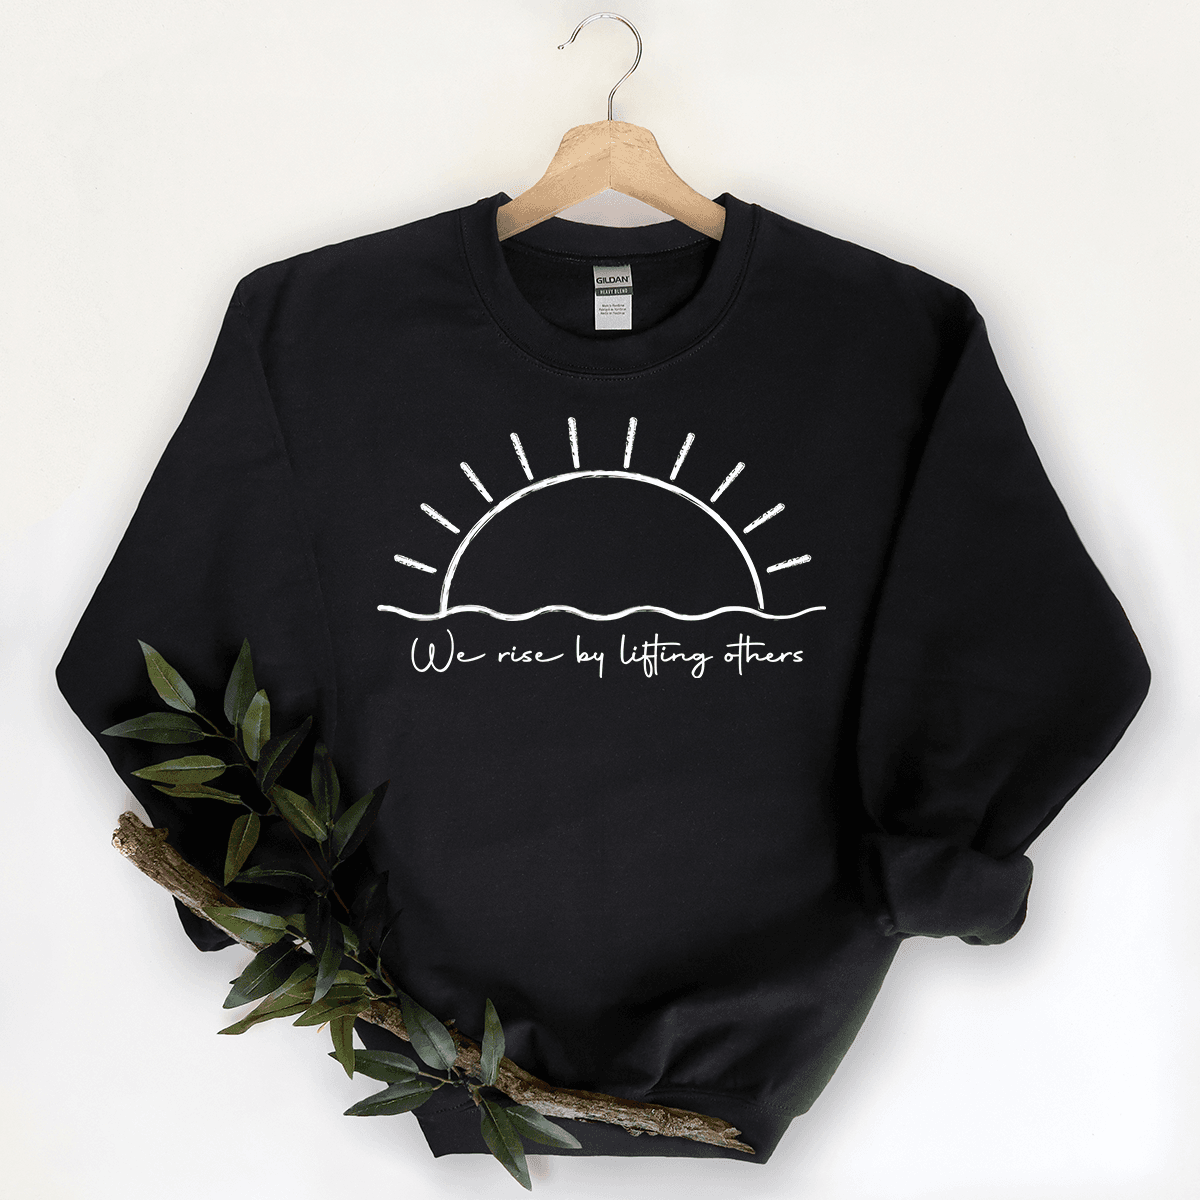 We Rise By Lifting Others - Sweatshirt